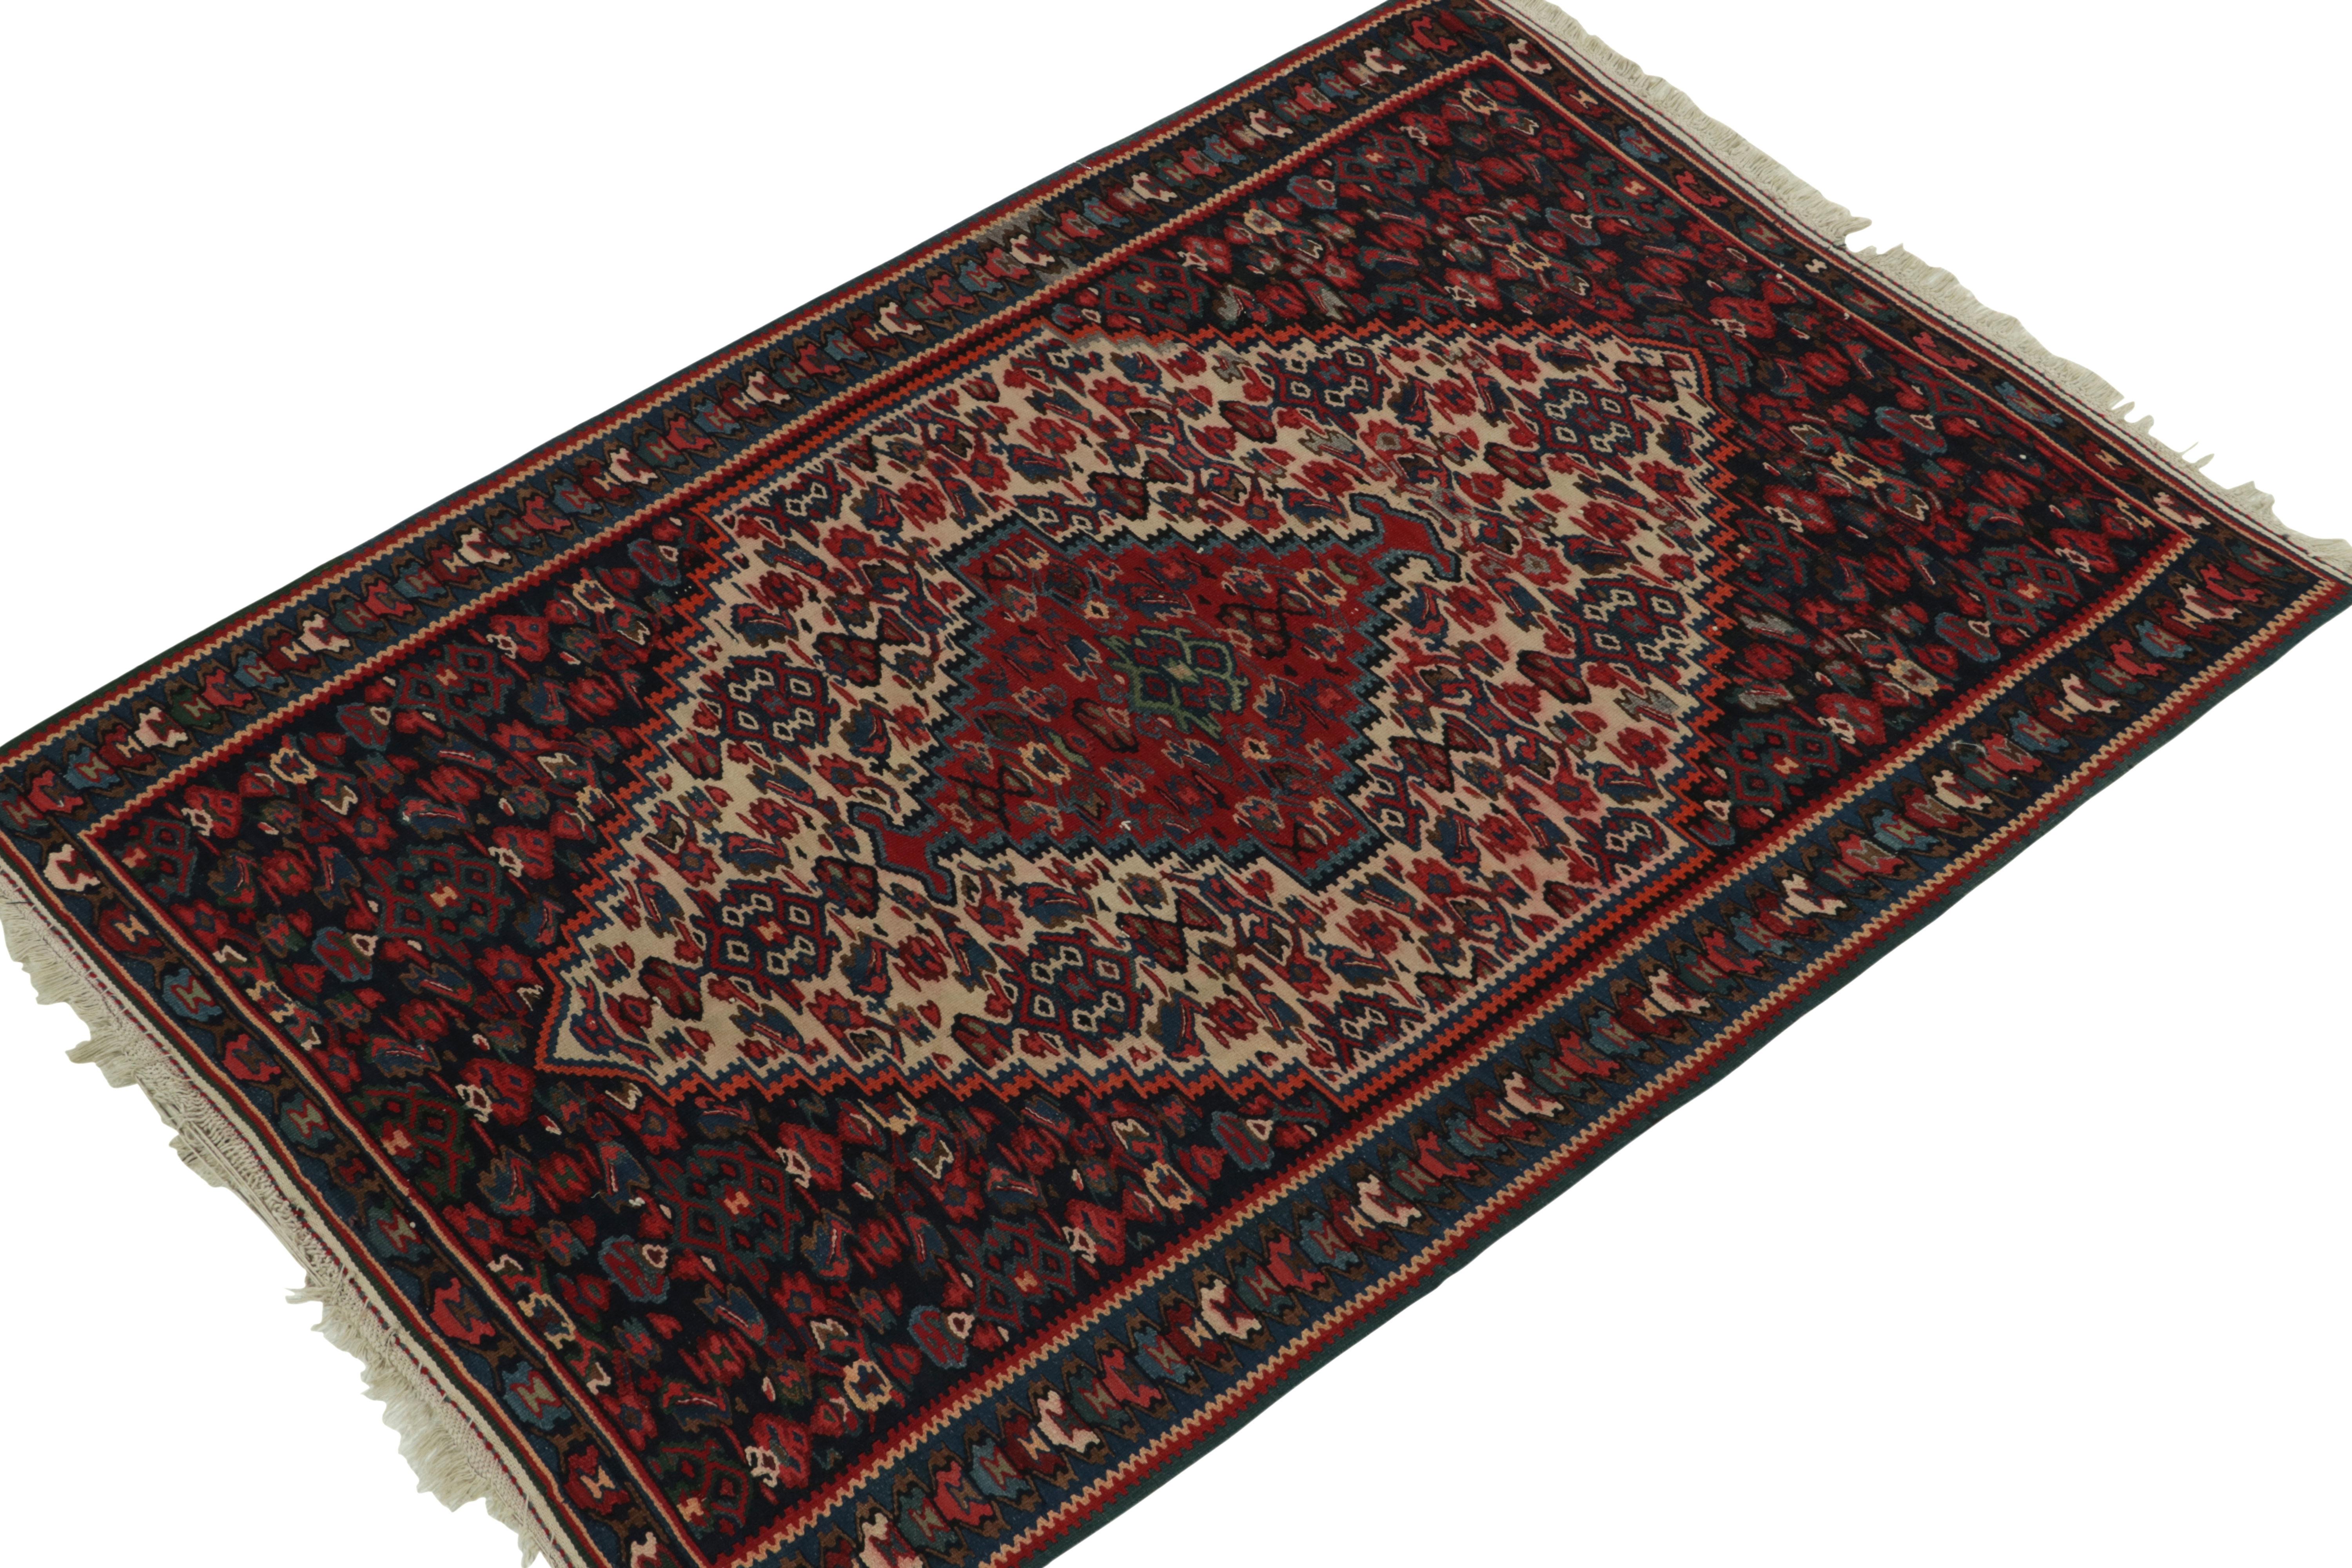 Hailing from Persia circa 1950s, a mid-century kilim rug now joining Rug & Kilim’s vintage selections. The Senneh kilim design connotes a union of  medallion and all-over field patterns with a rich array of burgundy red, aegean blue and accenting